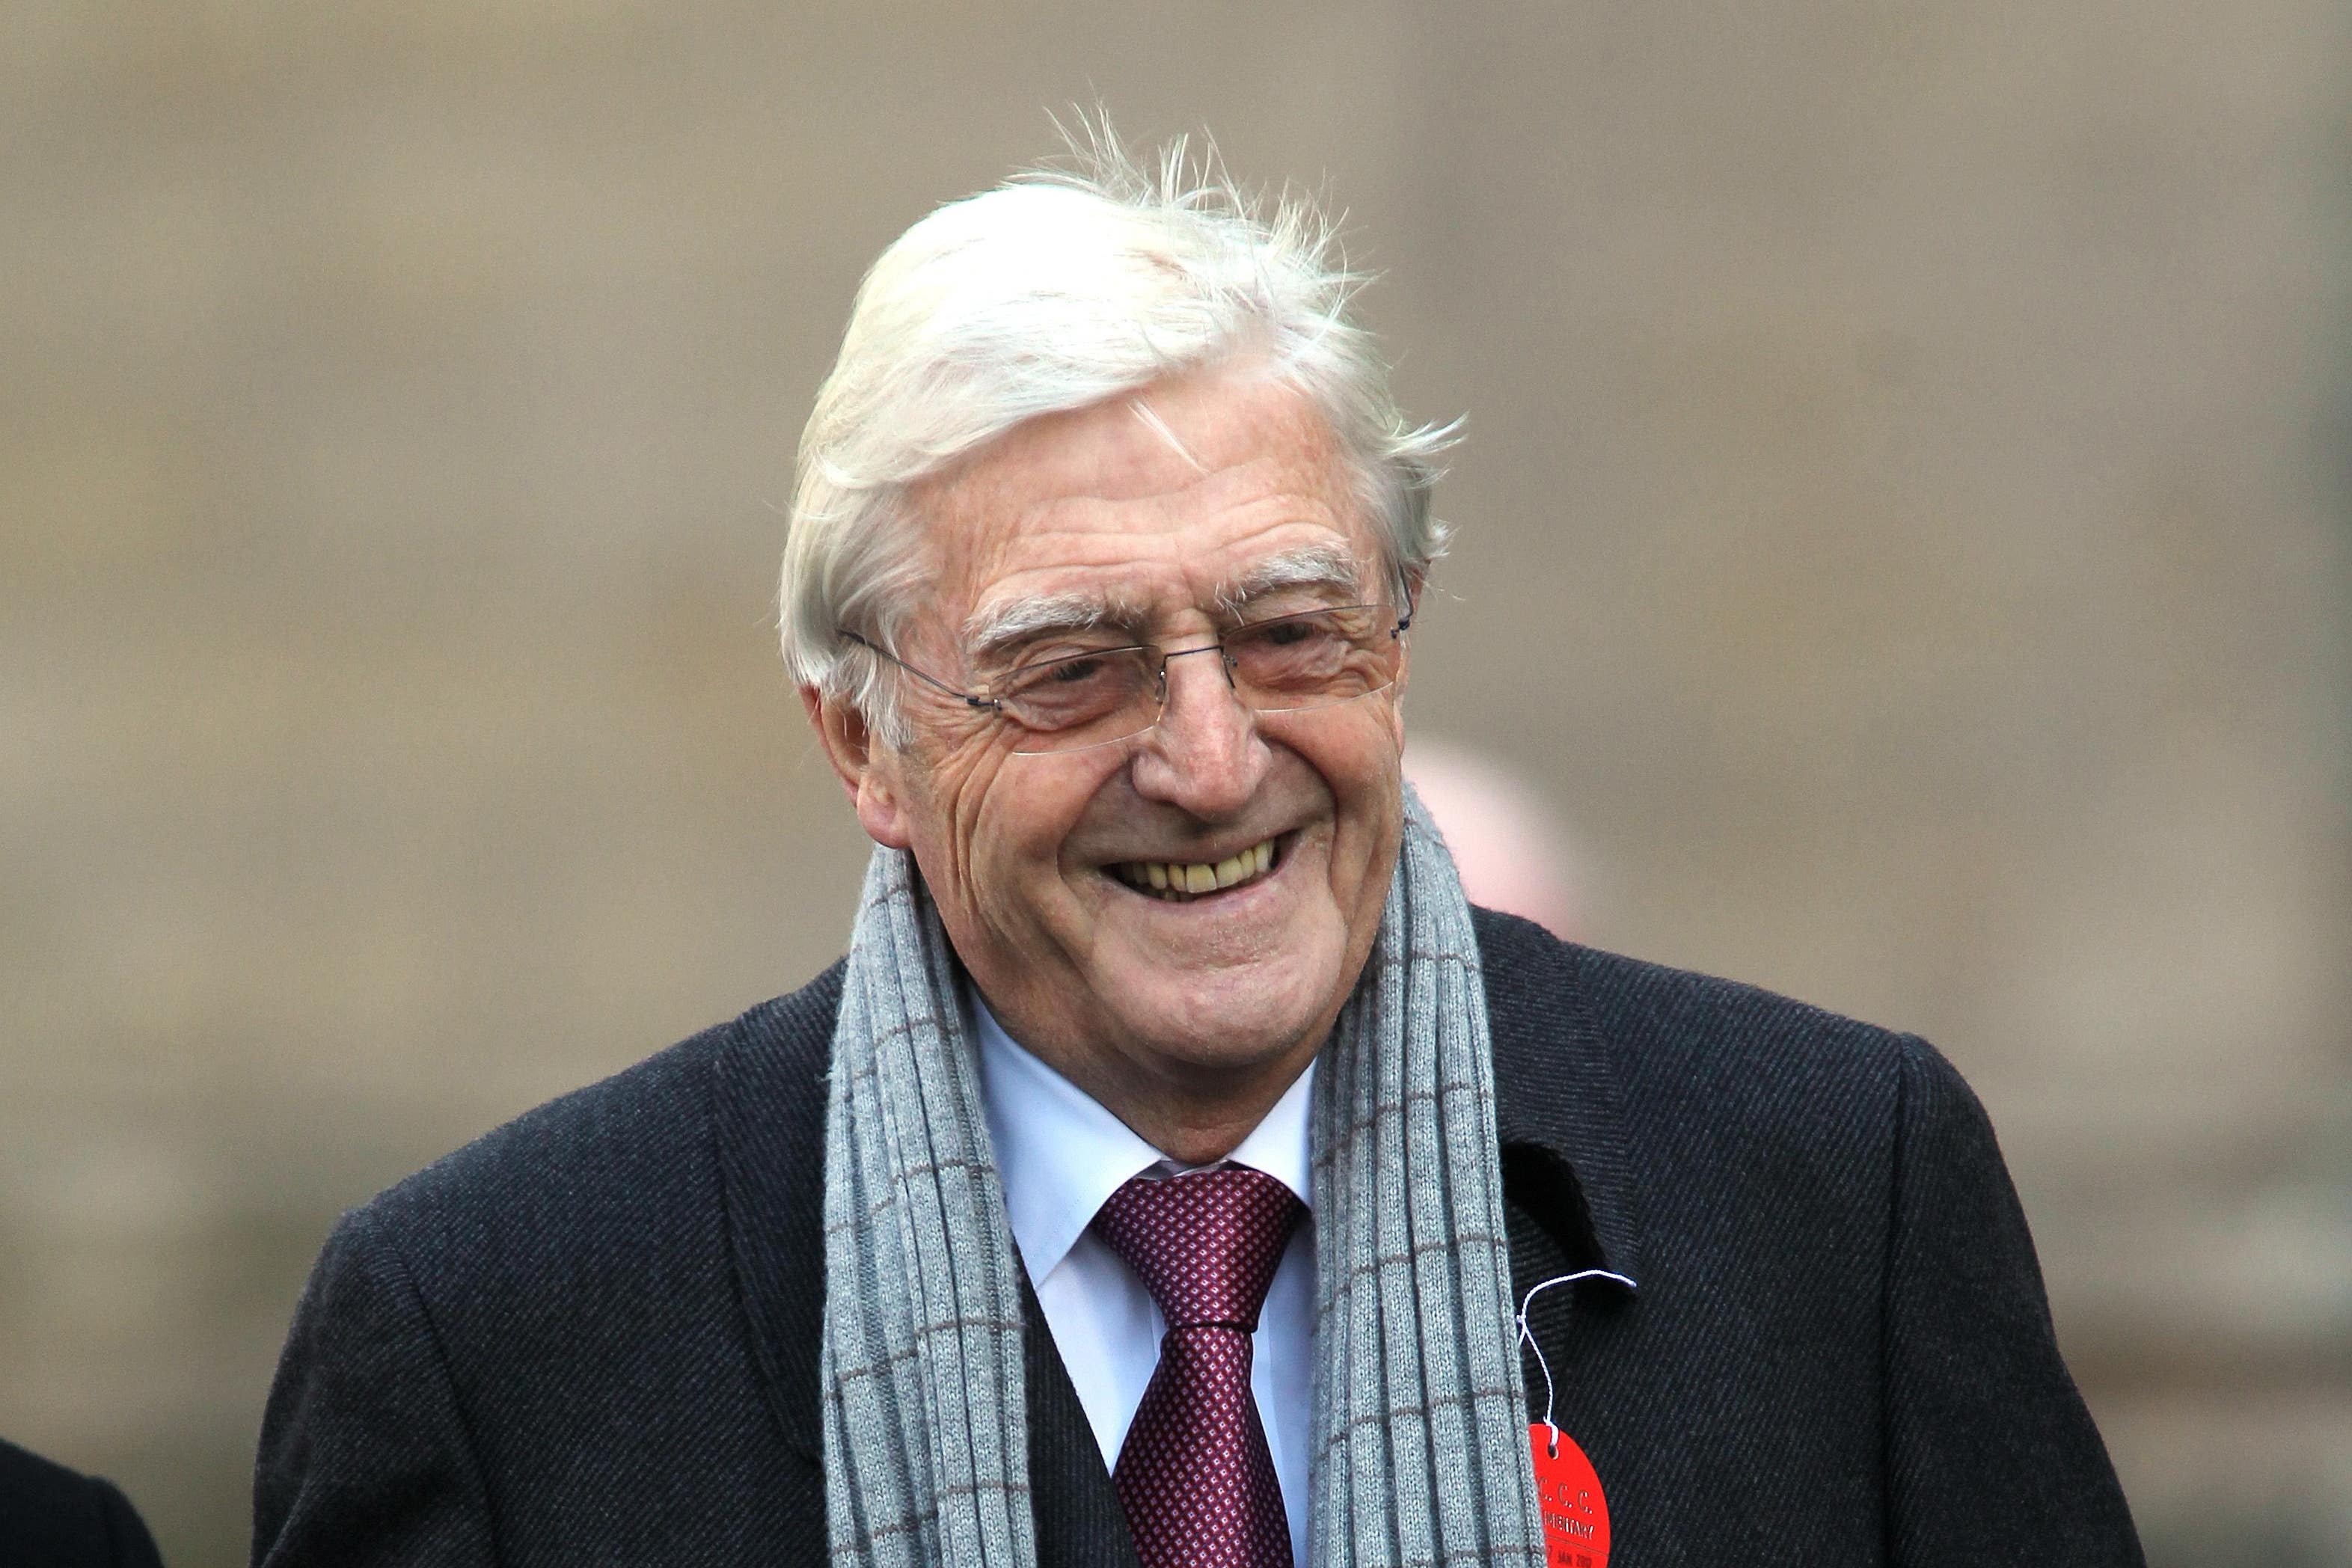 Michael Parkinson said the interviews he regretted missing out on most were Frank Sinatra and Sir Donald Bradman